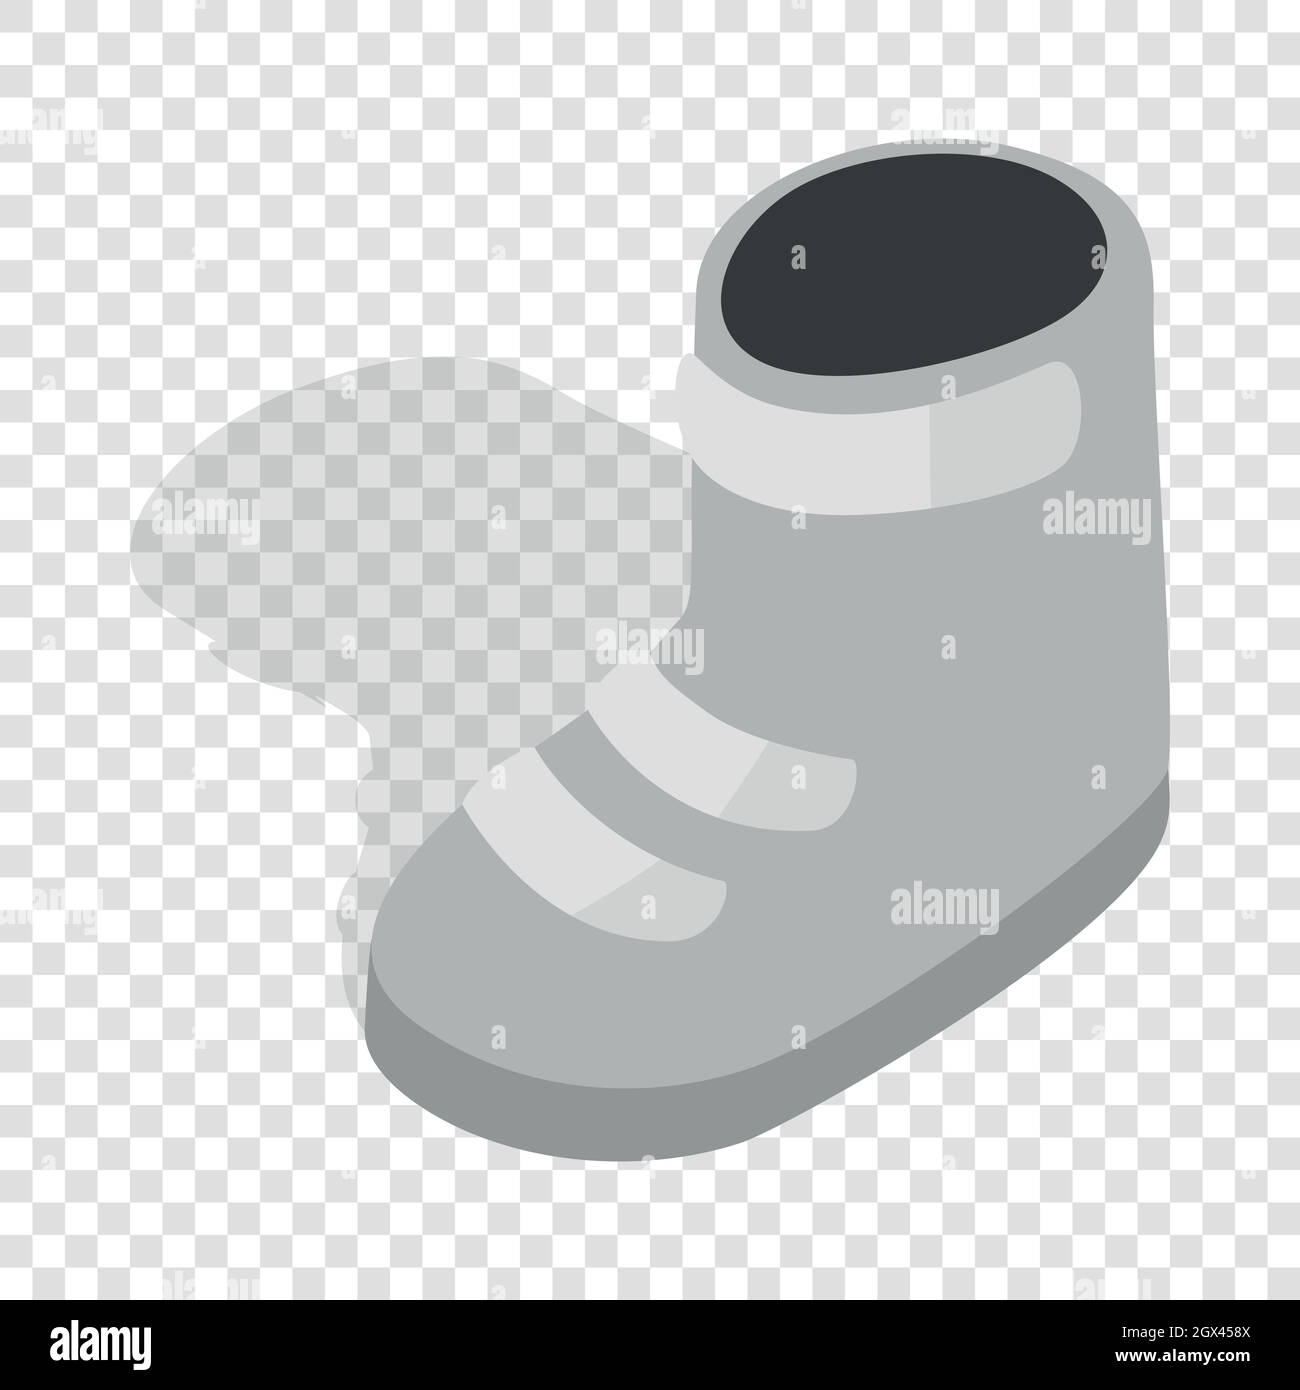 Snowboard boots isometric icon Stock Vector